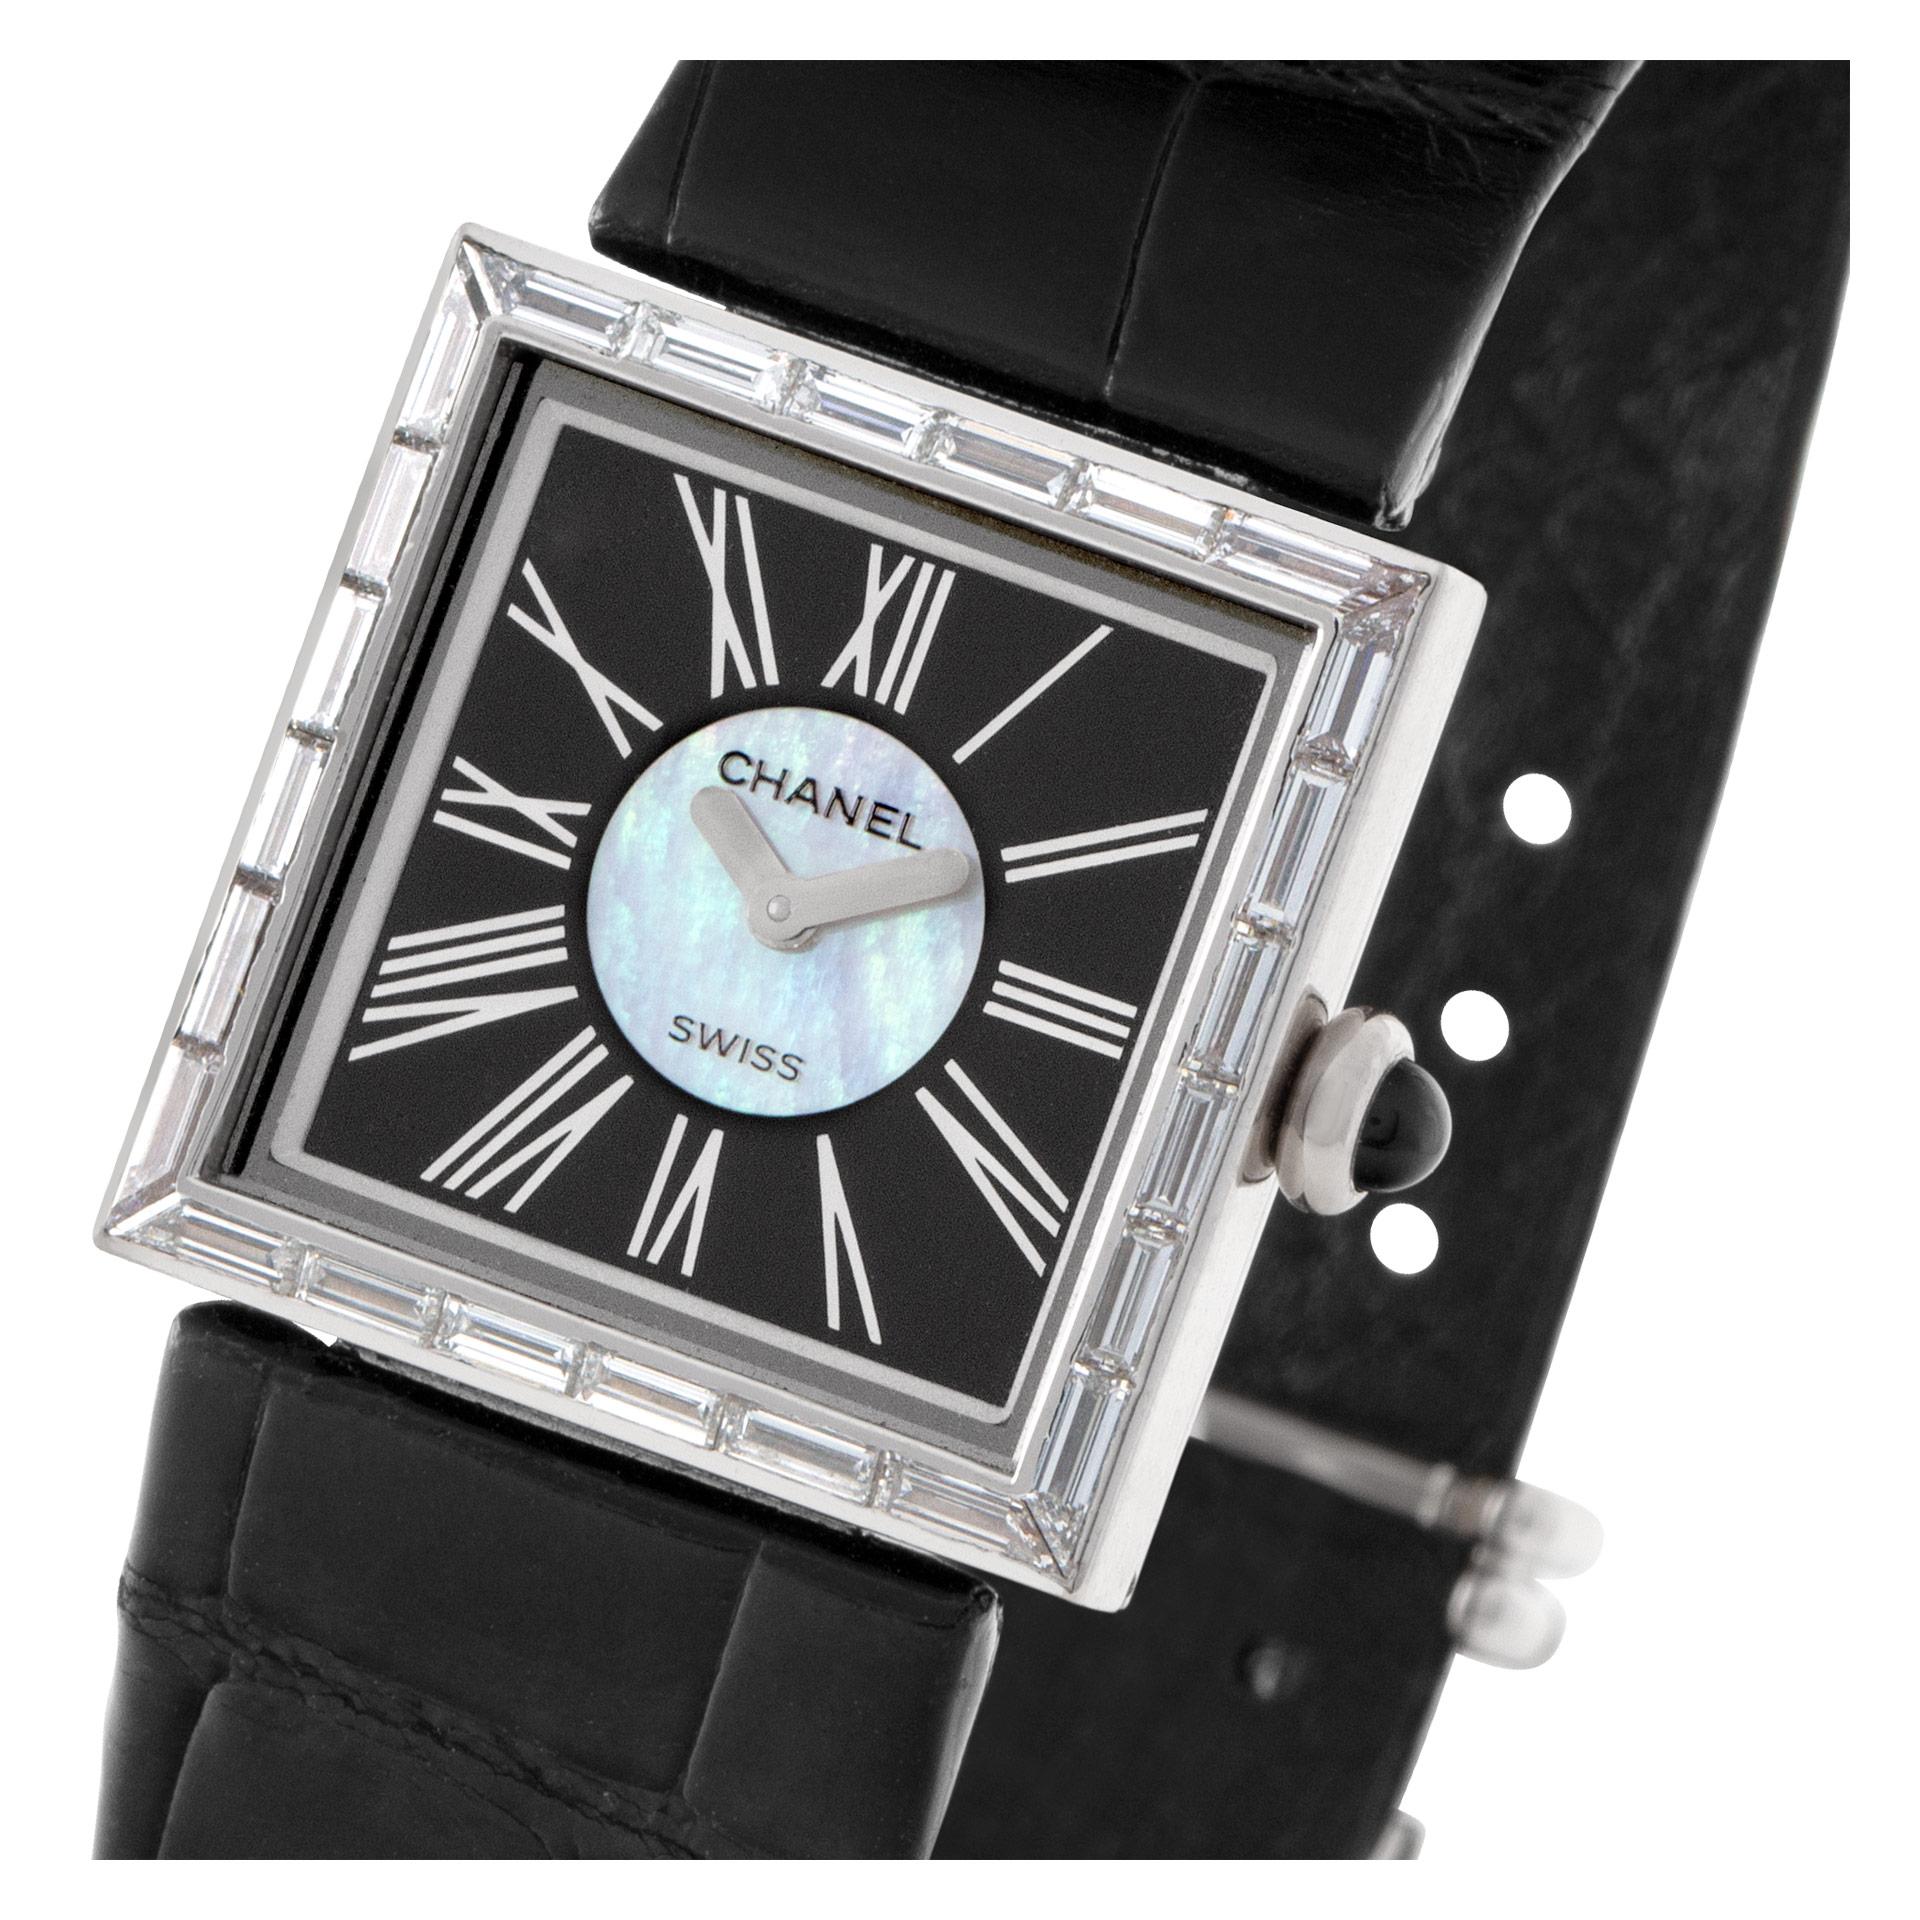 ESTIMATED RETAIL: $18,000 YOUR PRICE: $9,800 - Ladies Chanel Mademoiselle in 18k white gold with black & silver Roman Numeral dial surrounded by original baguette diamond bezel on a black leather strap with an 18k White Gold Two-Piece buckle. This